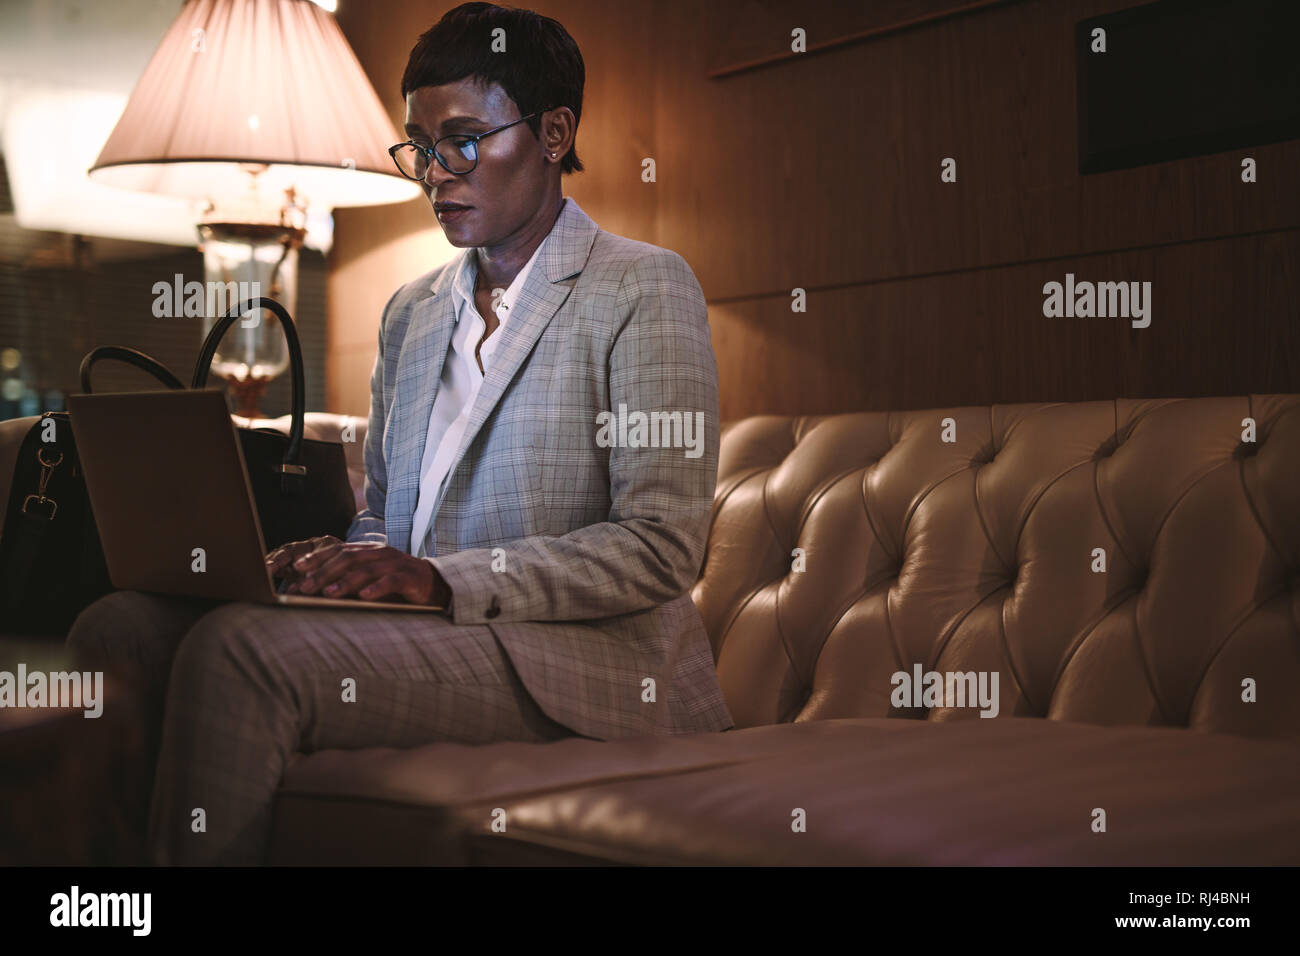 Businesswoman sitting at hotel lobby and working on laptop. African female CEO on business tour using laptop in hotel lobby. Stock Photo